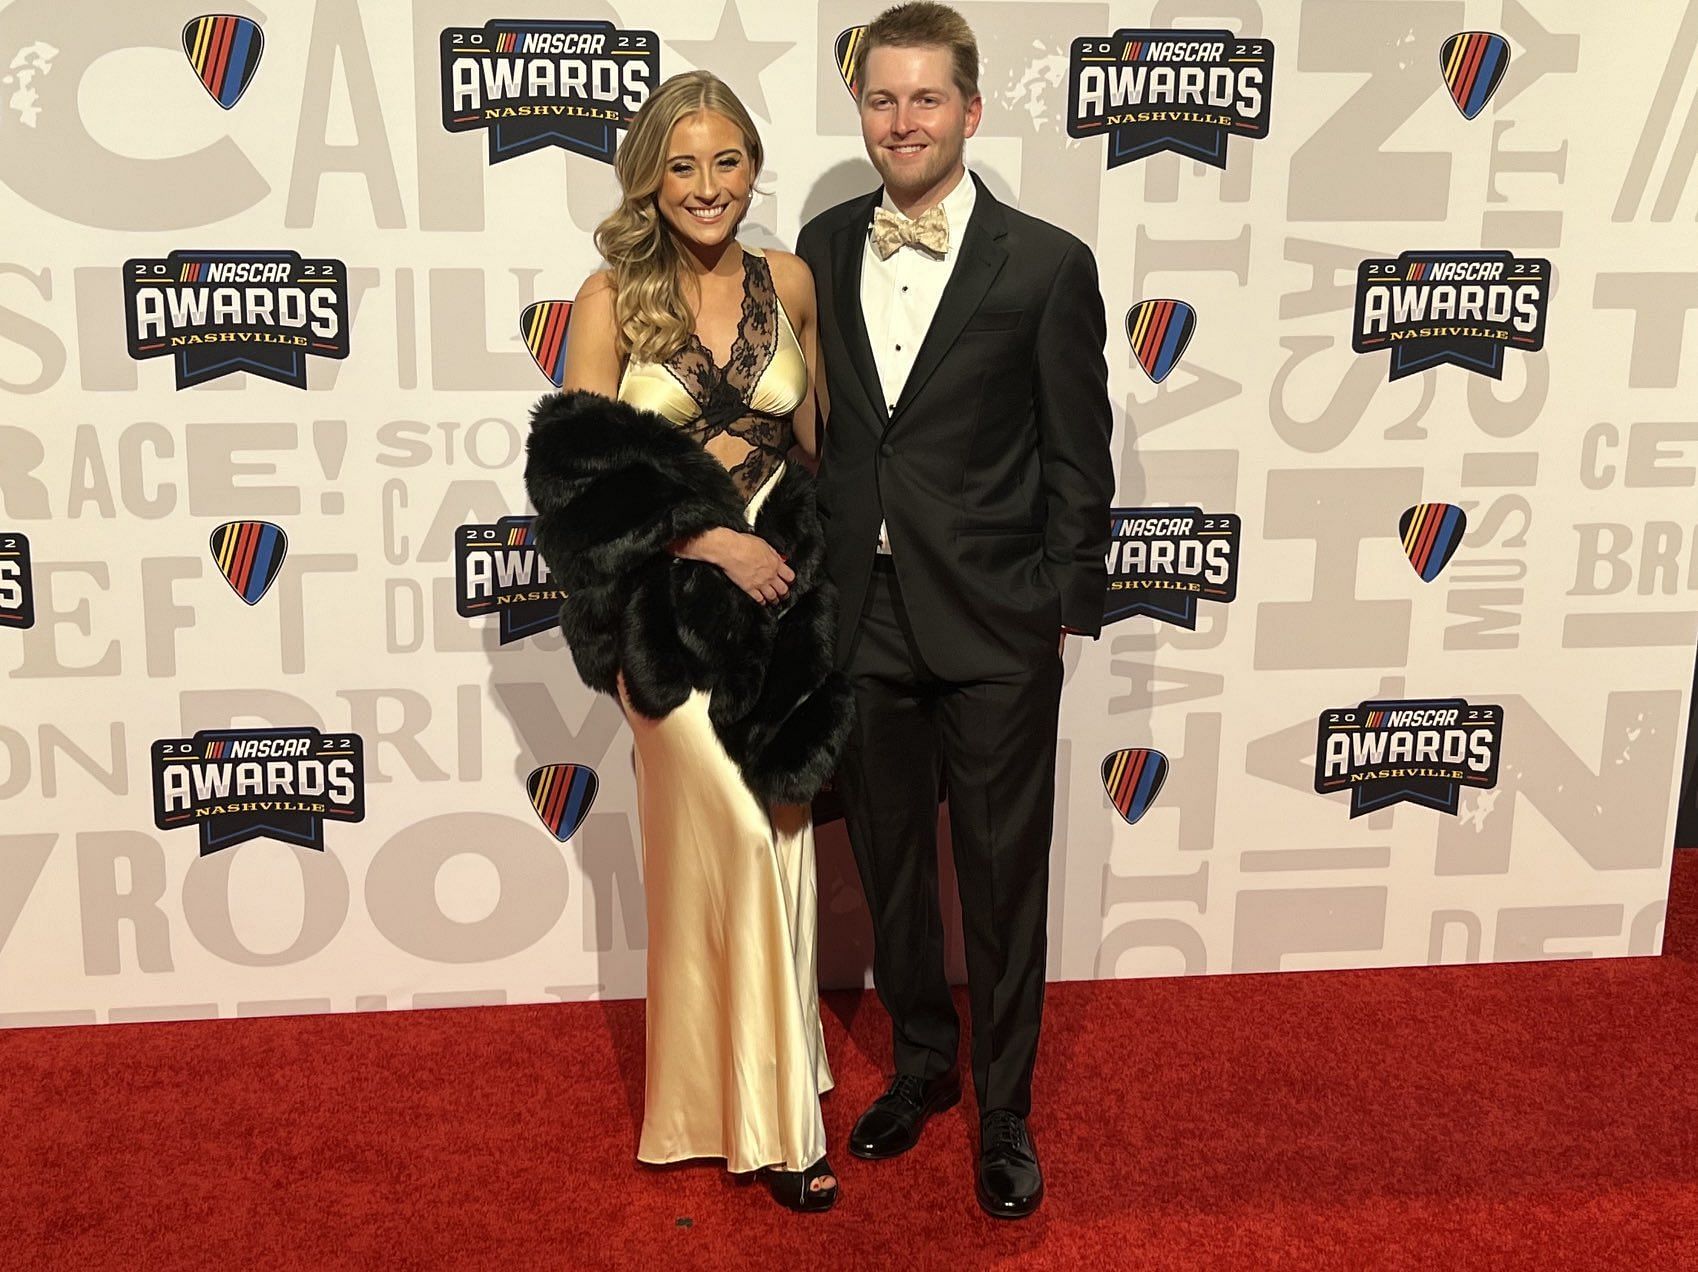 (L-R) Erin Blaney with NASCAR Cup Series driver William Byron. Picture Credits: Dustin Long/Twitter